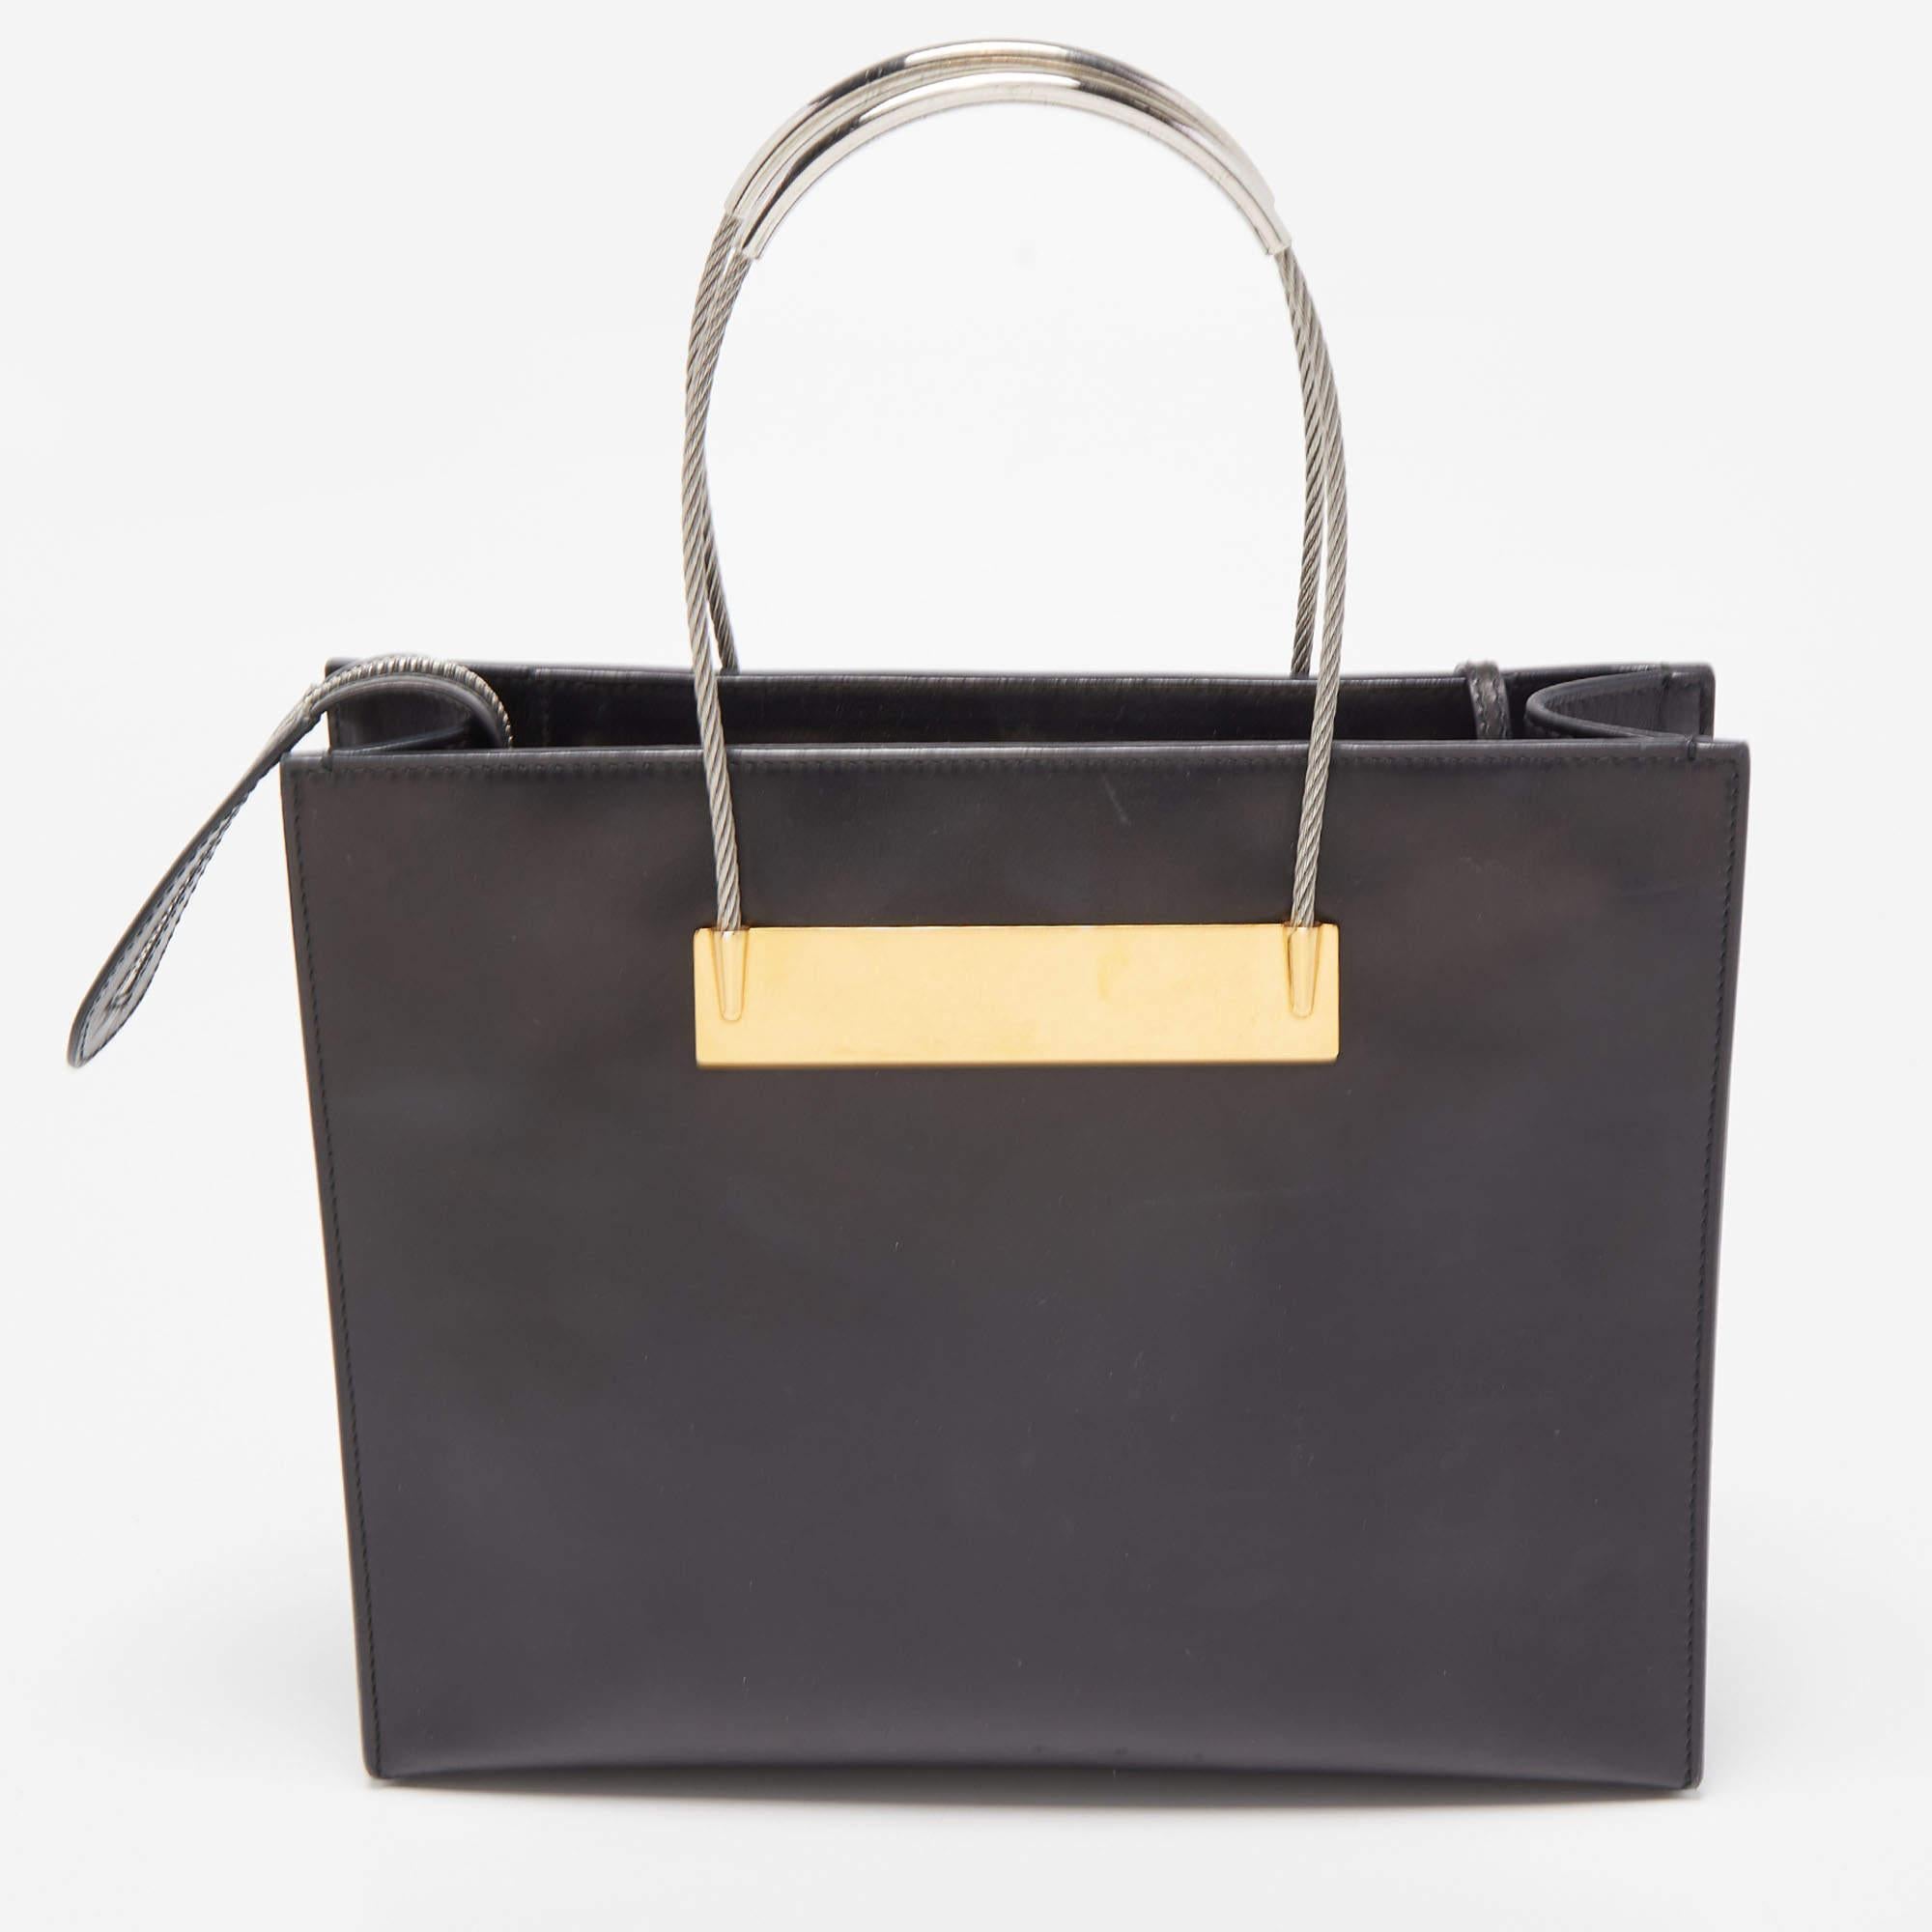 Striking a beautiful balance between essentiality and opulence, this tote from the House of Balenciaga ensures that your handbag requirements are taken care of. It is equipped with practical features for all-day ease.

Includes: Original Dustbag,